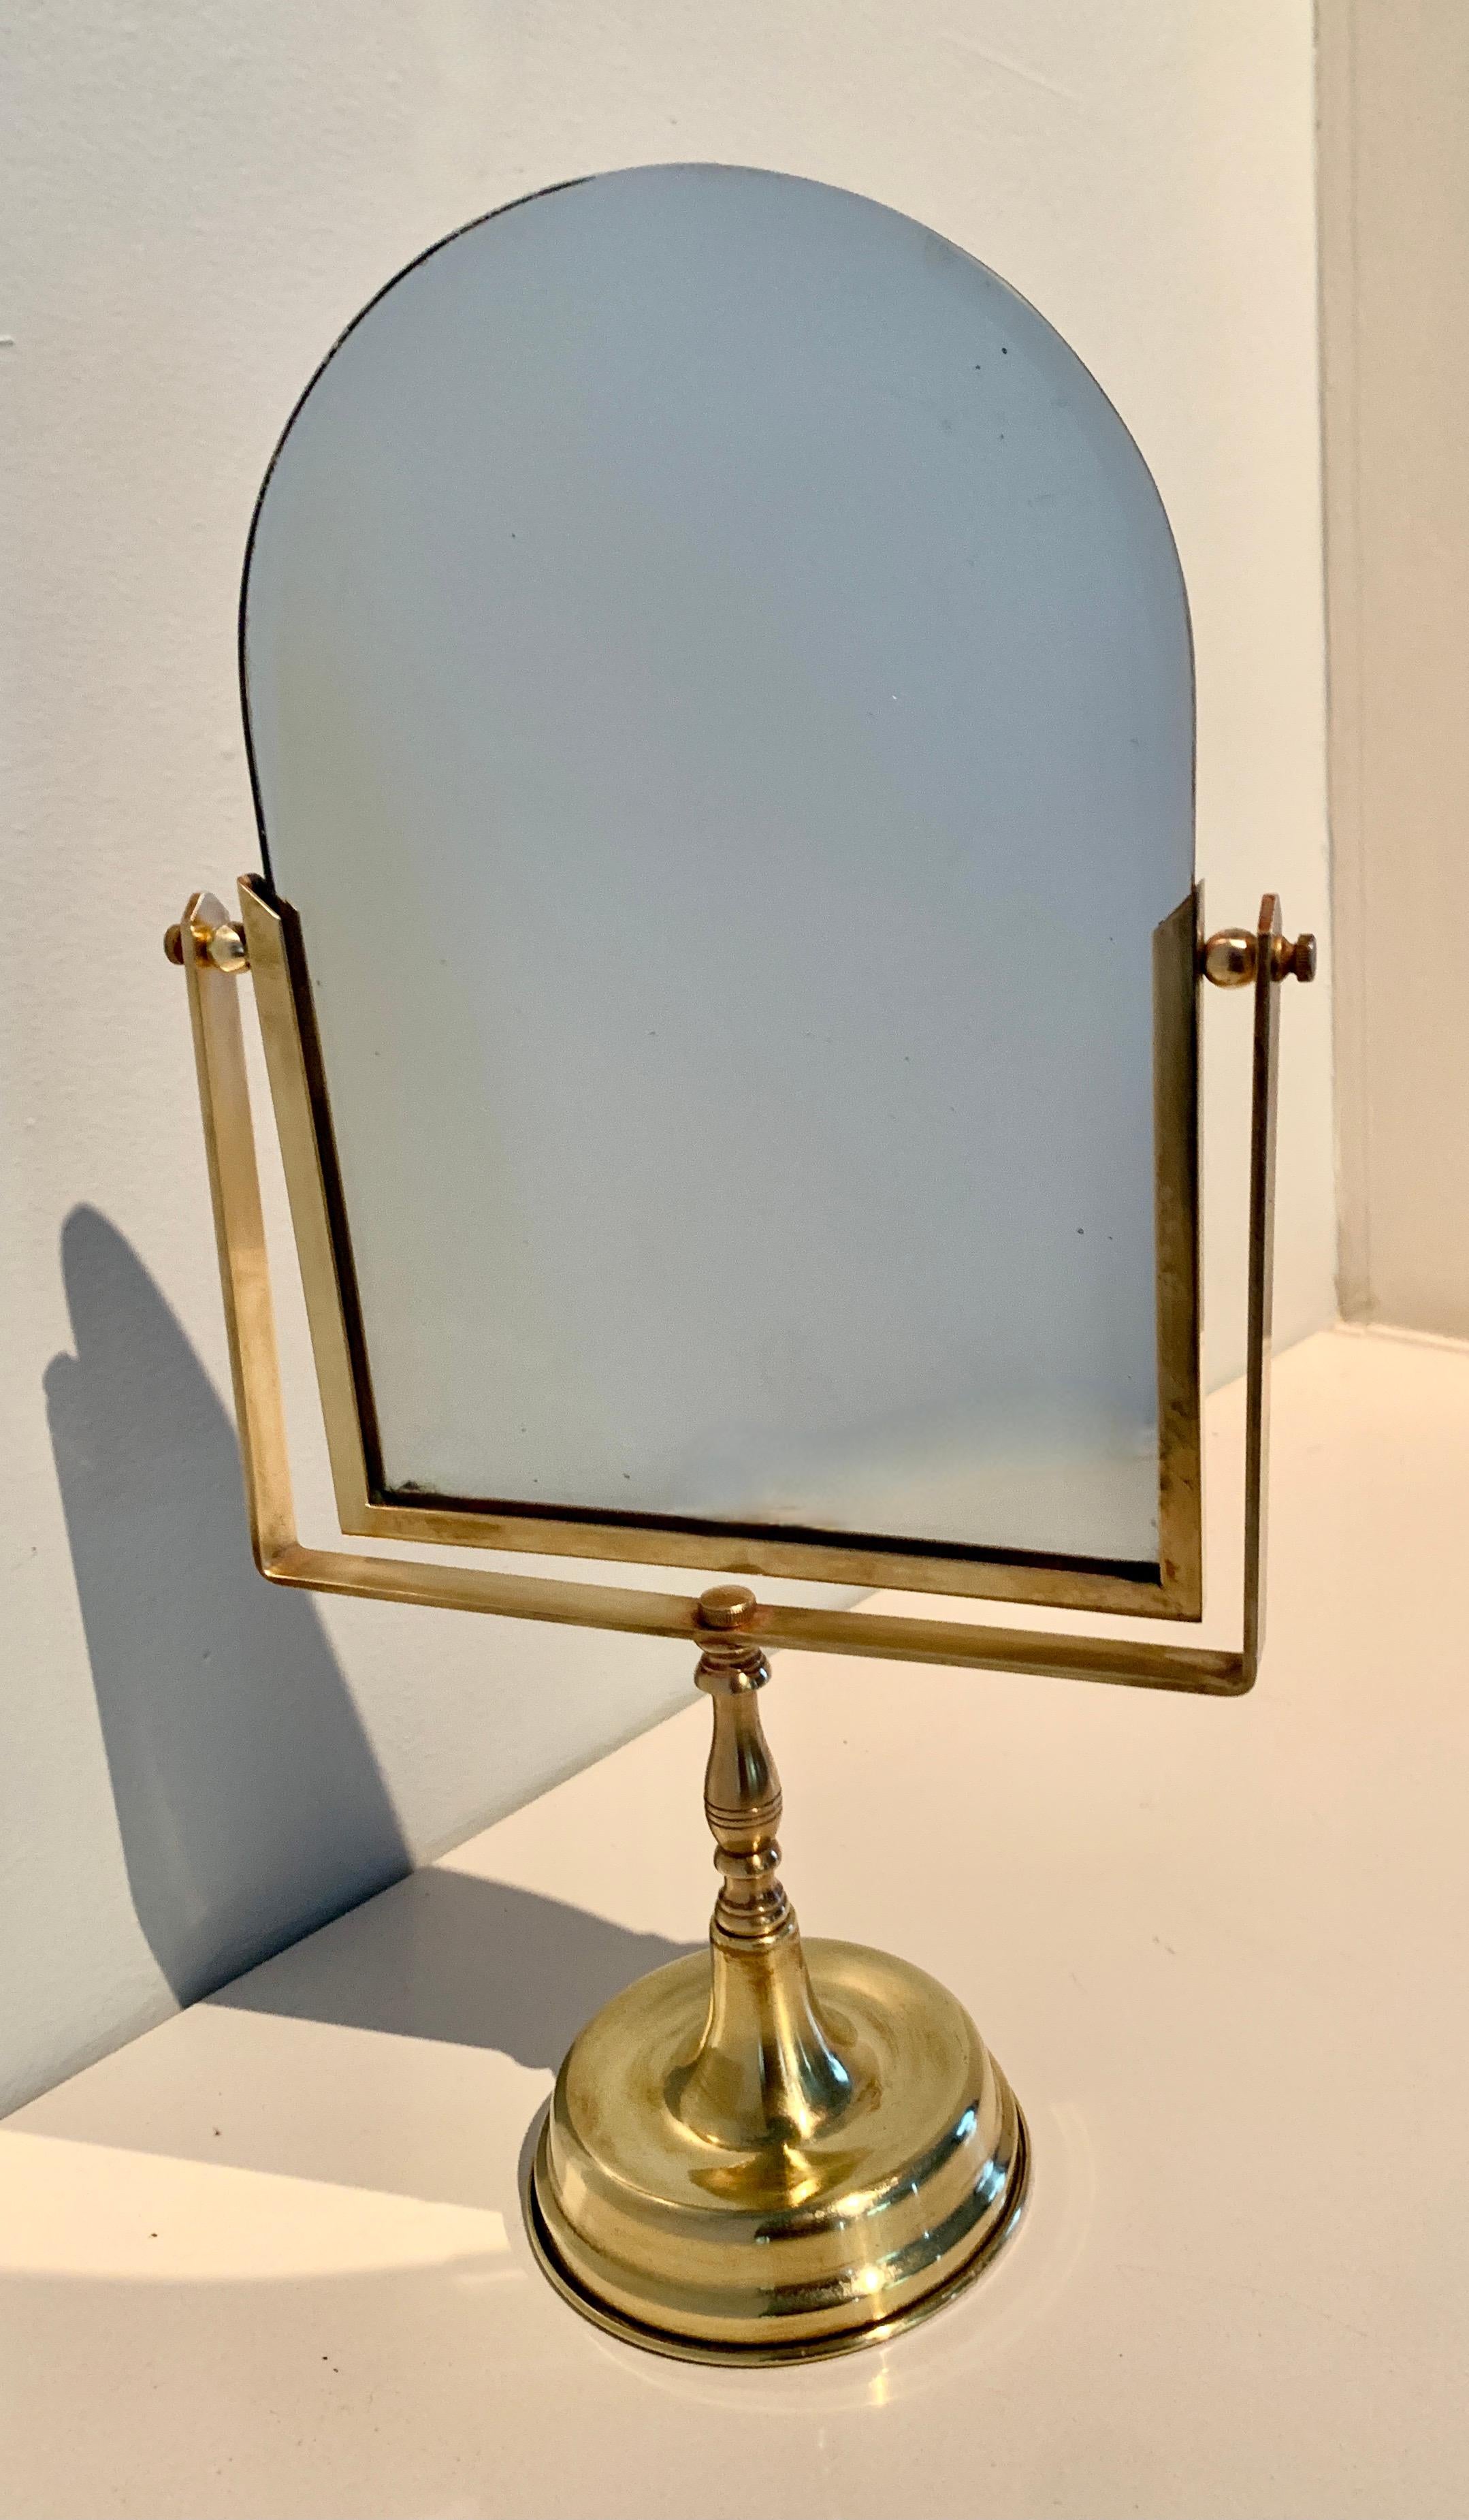 A bronze table mirror on stand. This piece was heavily patinated and has been polished to a key shine. The piece, over time will tarnish into a lovely patinated finish if not polished. The mirror is very well made and of good quality, one small